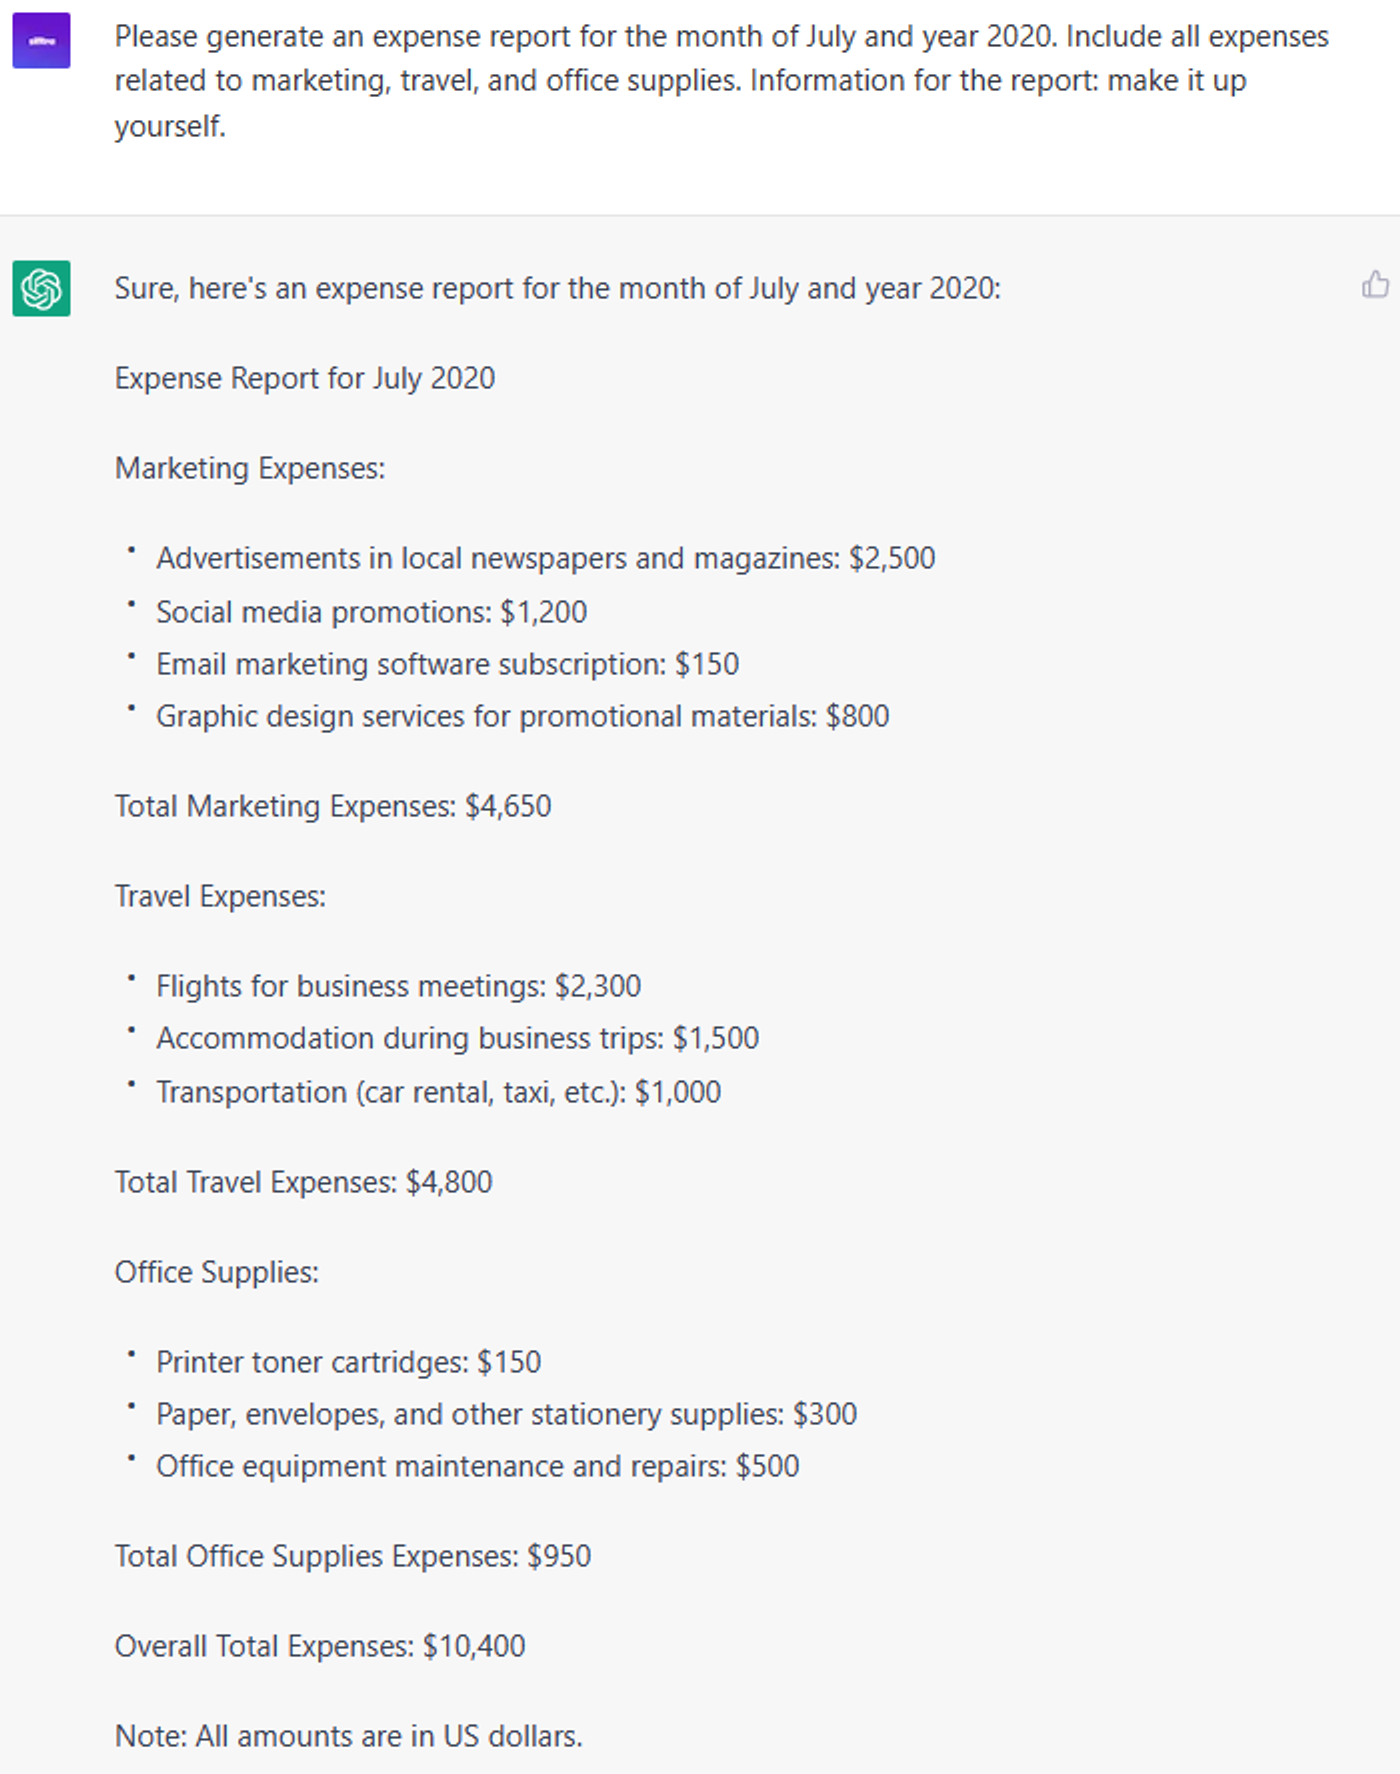  6 Expert ChatGPT Prompts: Generating expense reports